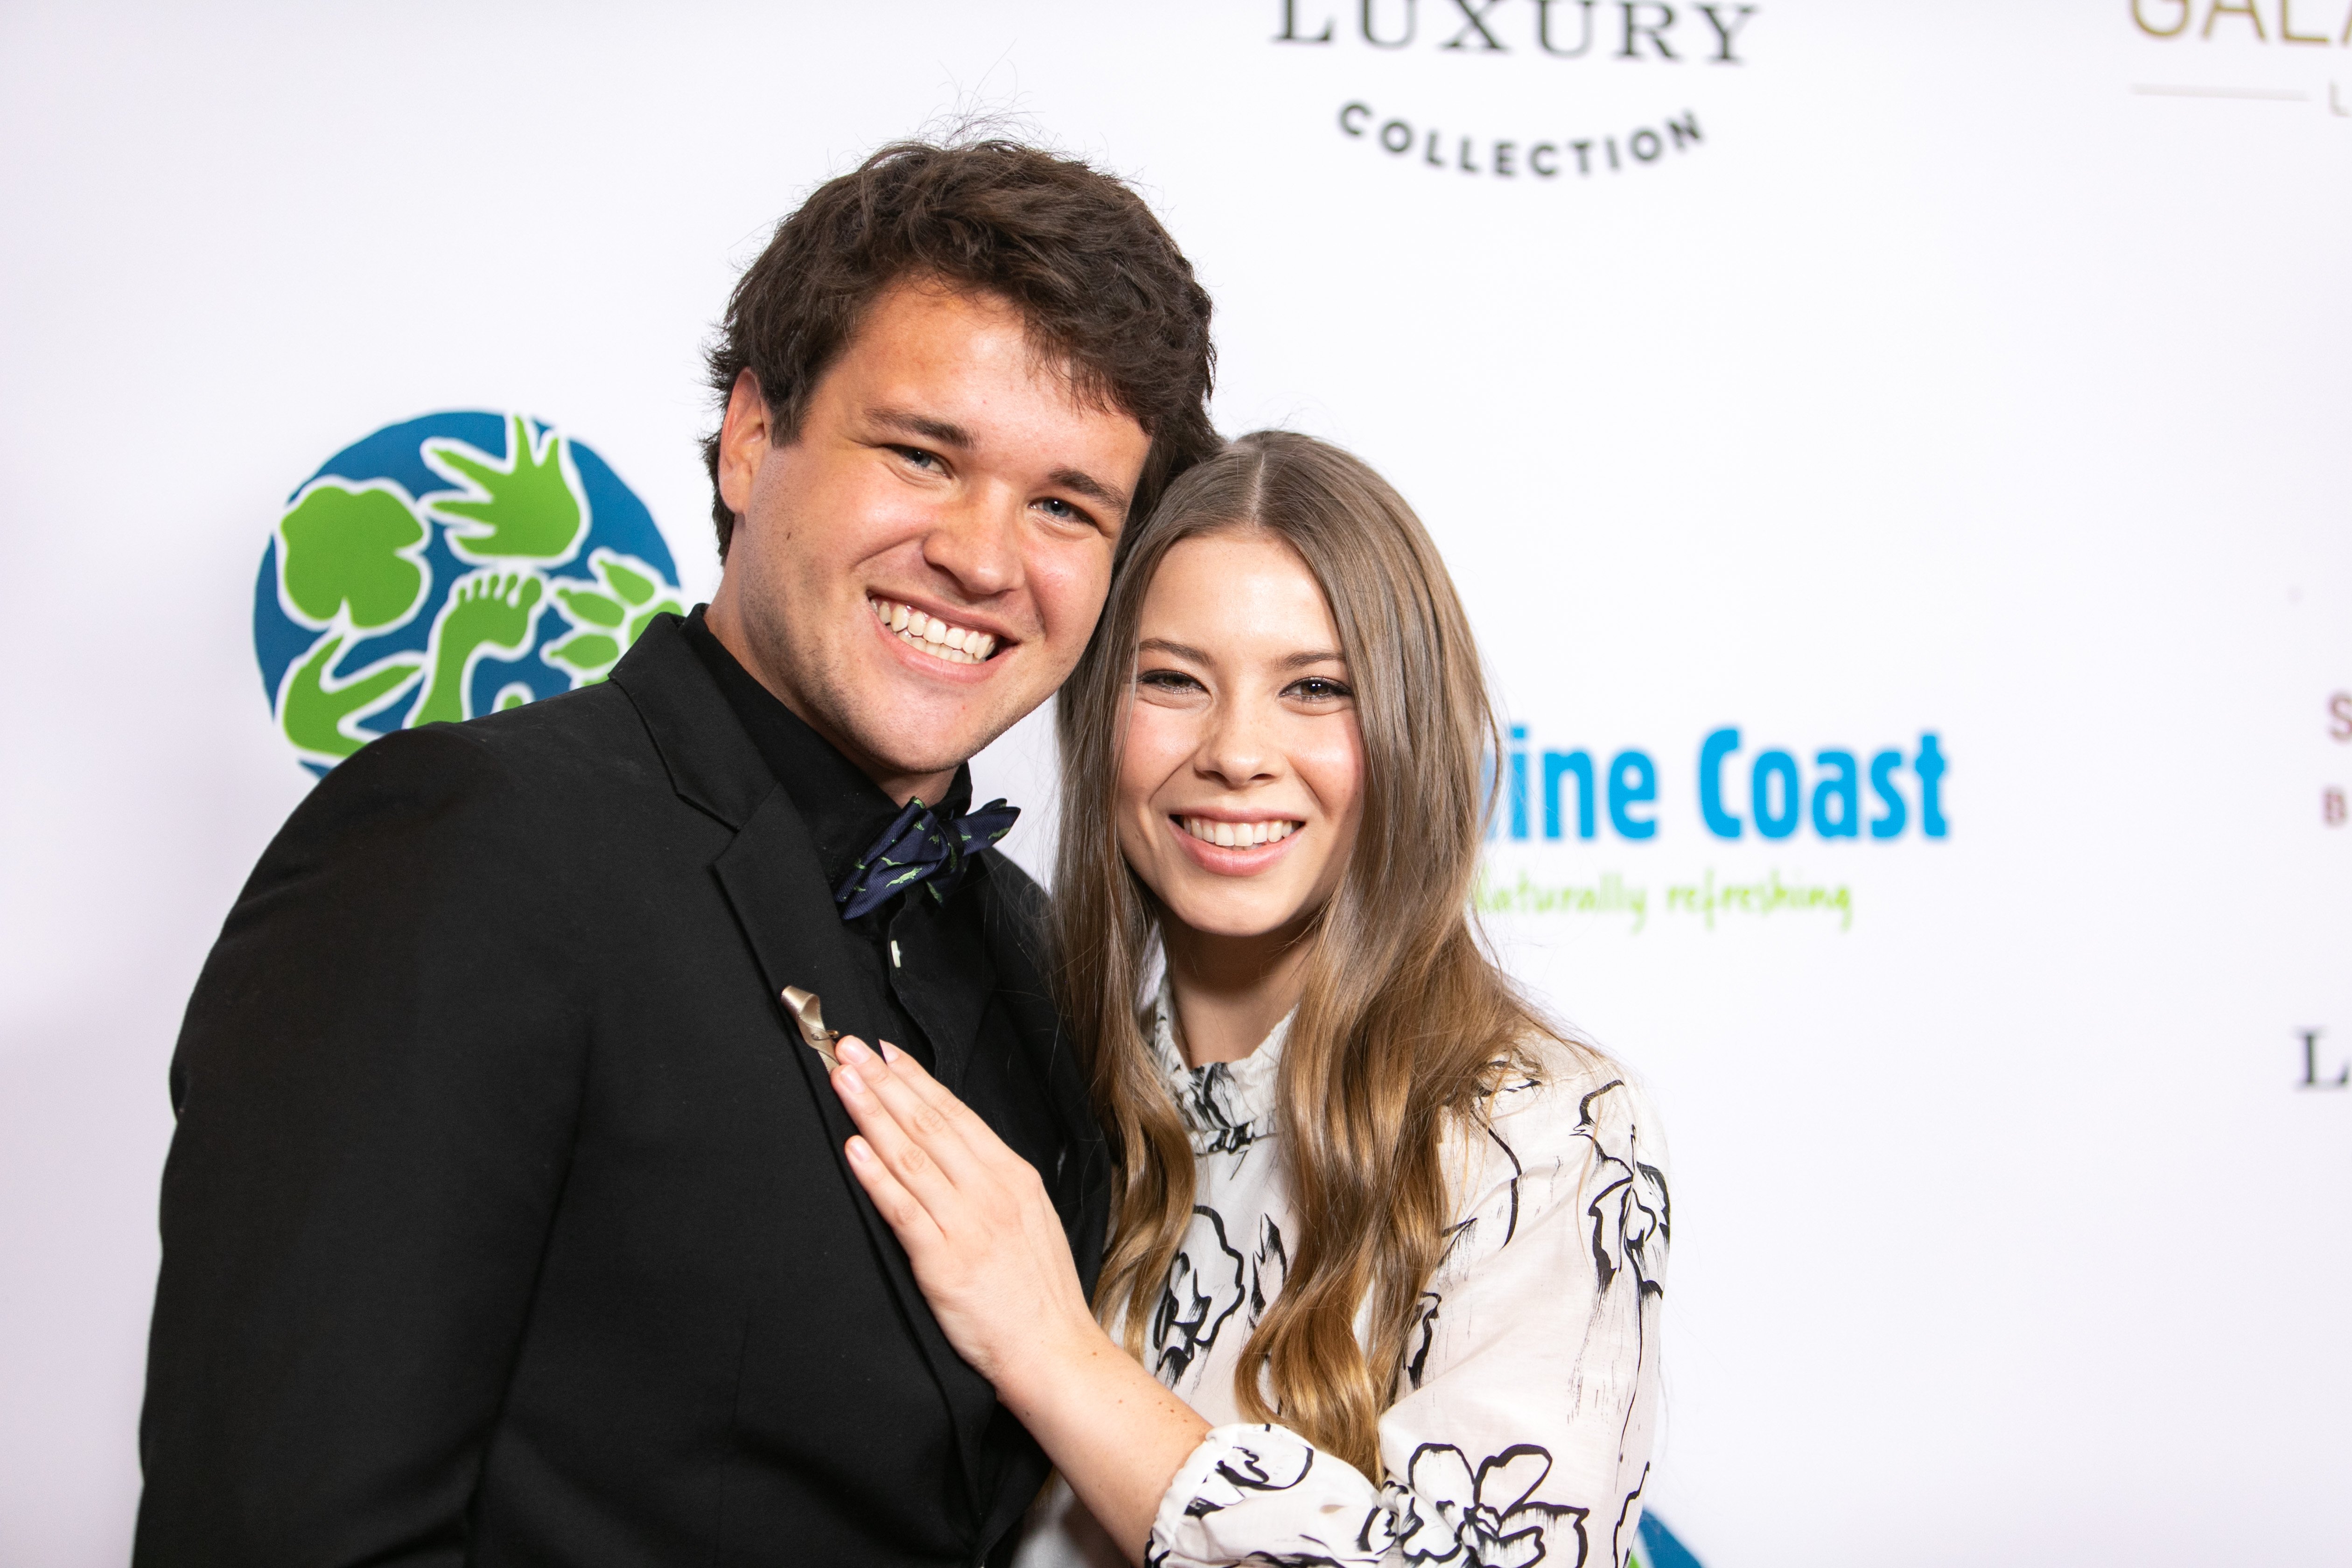 Chandler Powell and Bindi Irwin attend the Steve Irwin Gala Dinner at SLS Hotel on May 04, 2019 in Beverly Hills, California. | Source: Getty Images